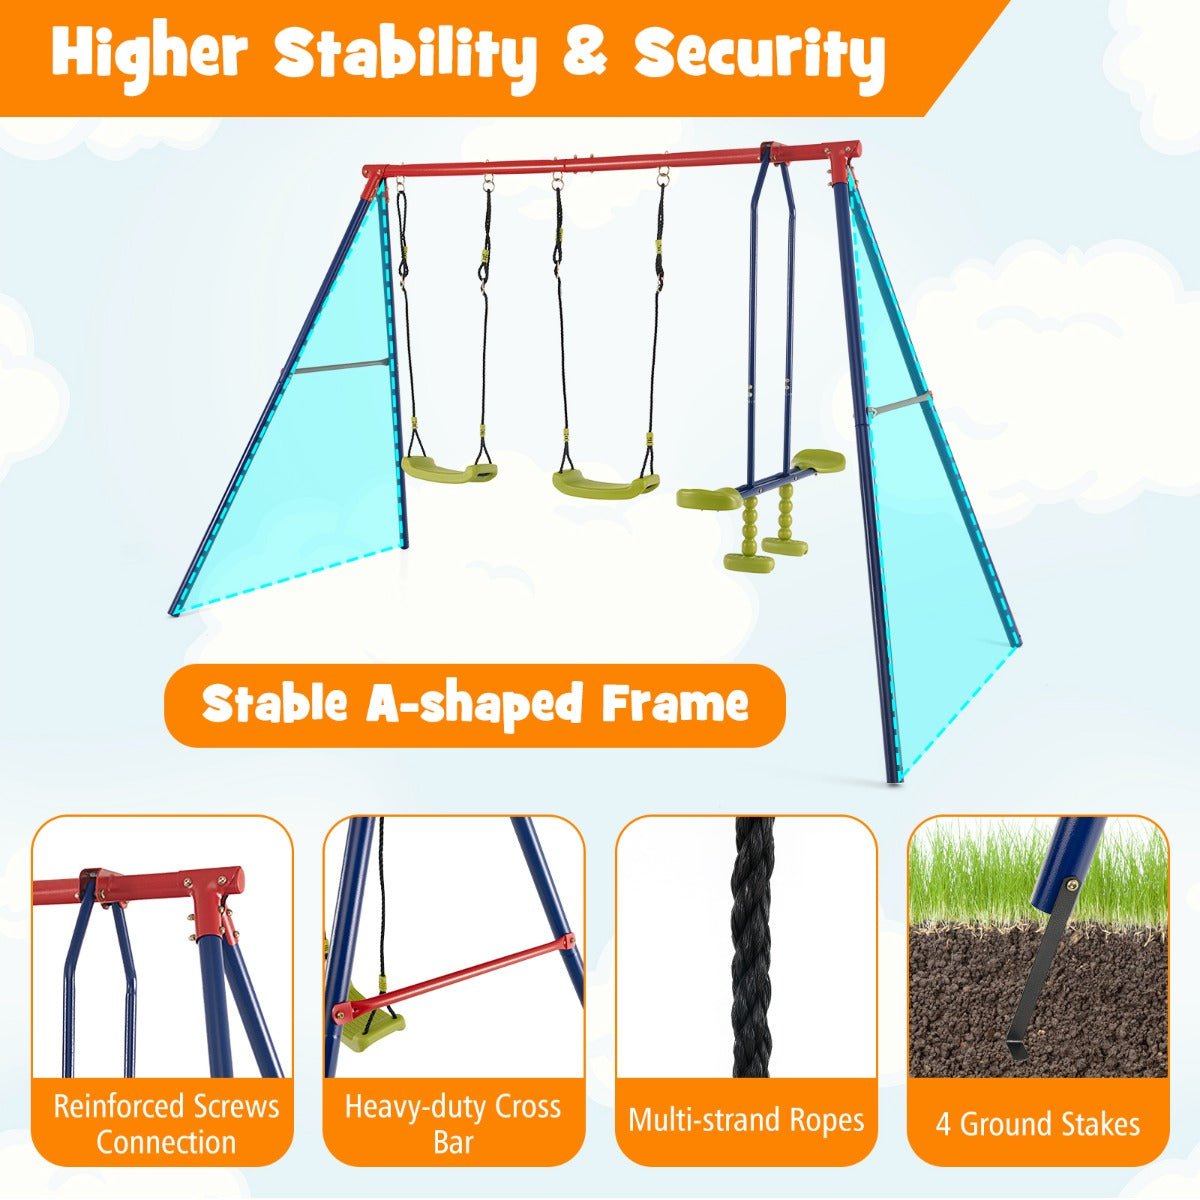 Swing Set with Adjustable Height: 2 Playful Options for Kids